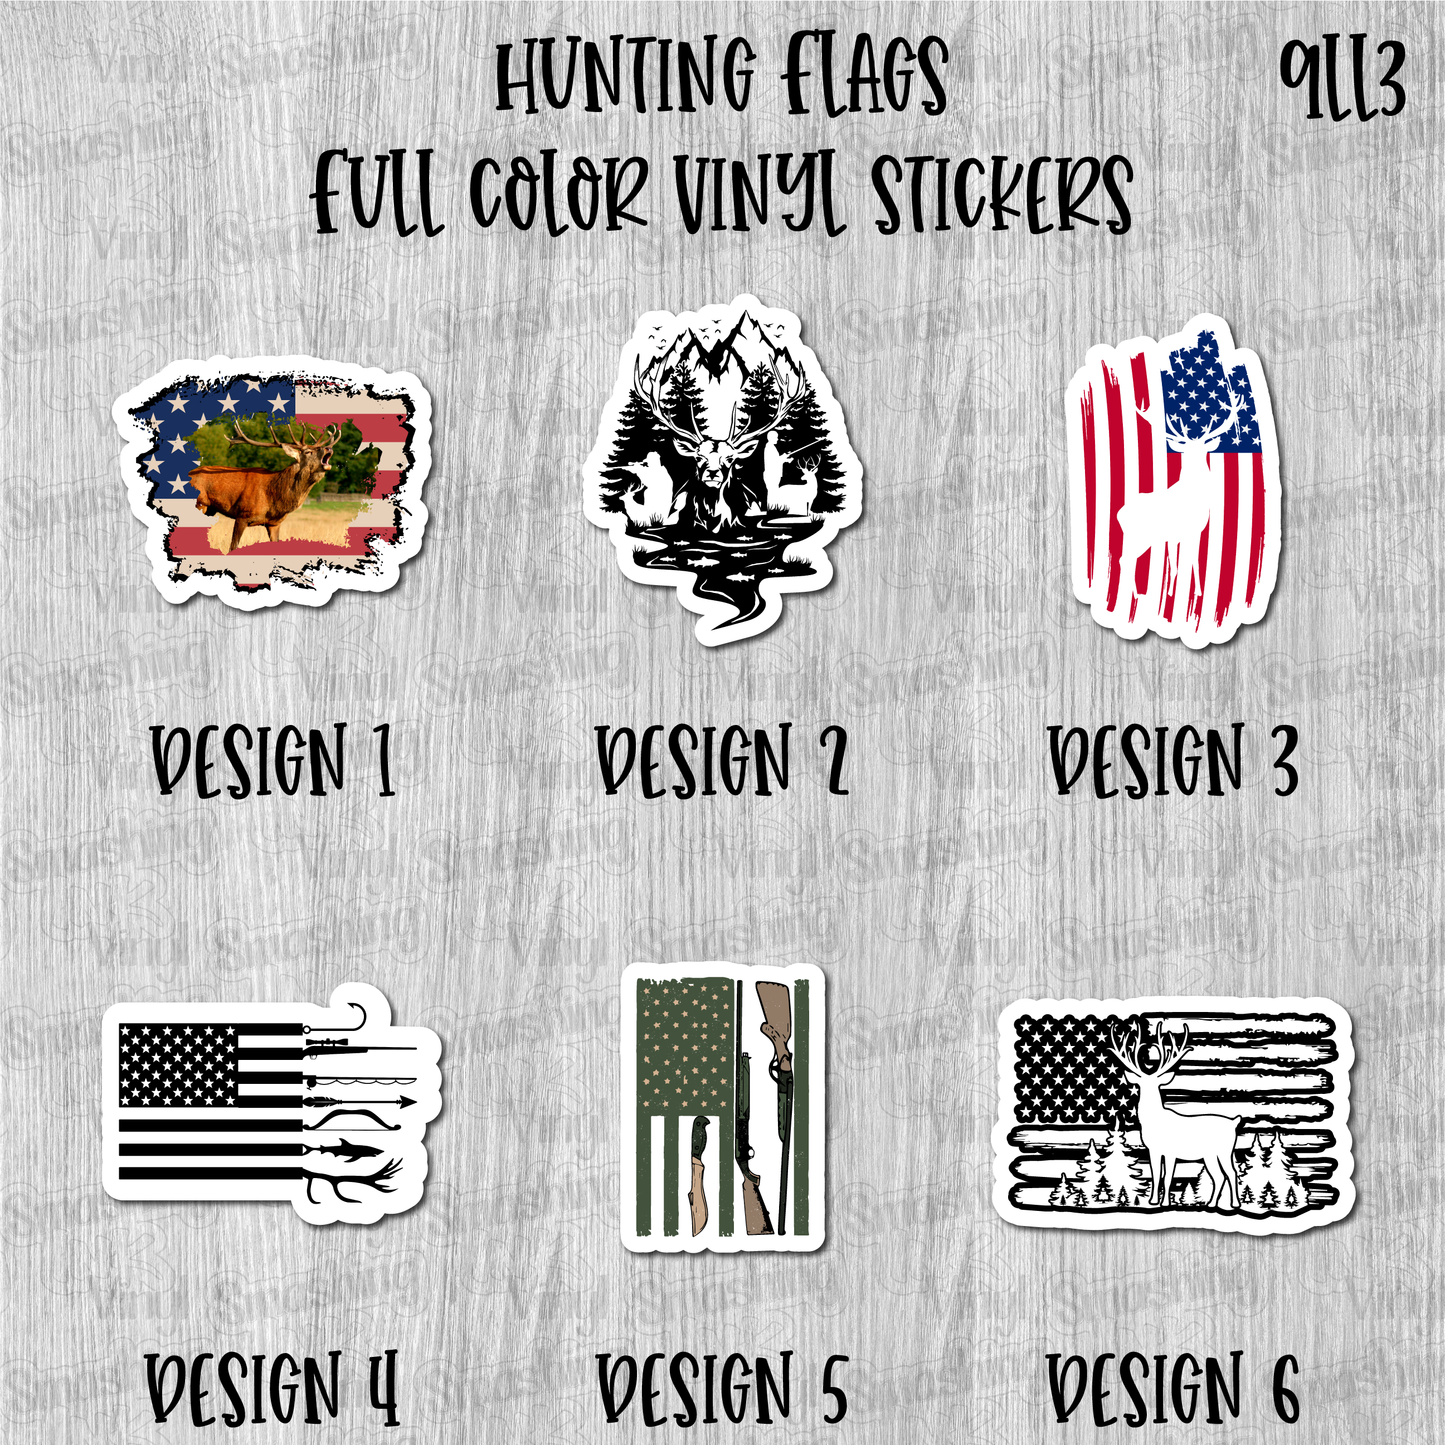 Hunting Flags - Full Color Vinyl Stickers (SHIPS IN 3-7 BUS DAYS)